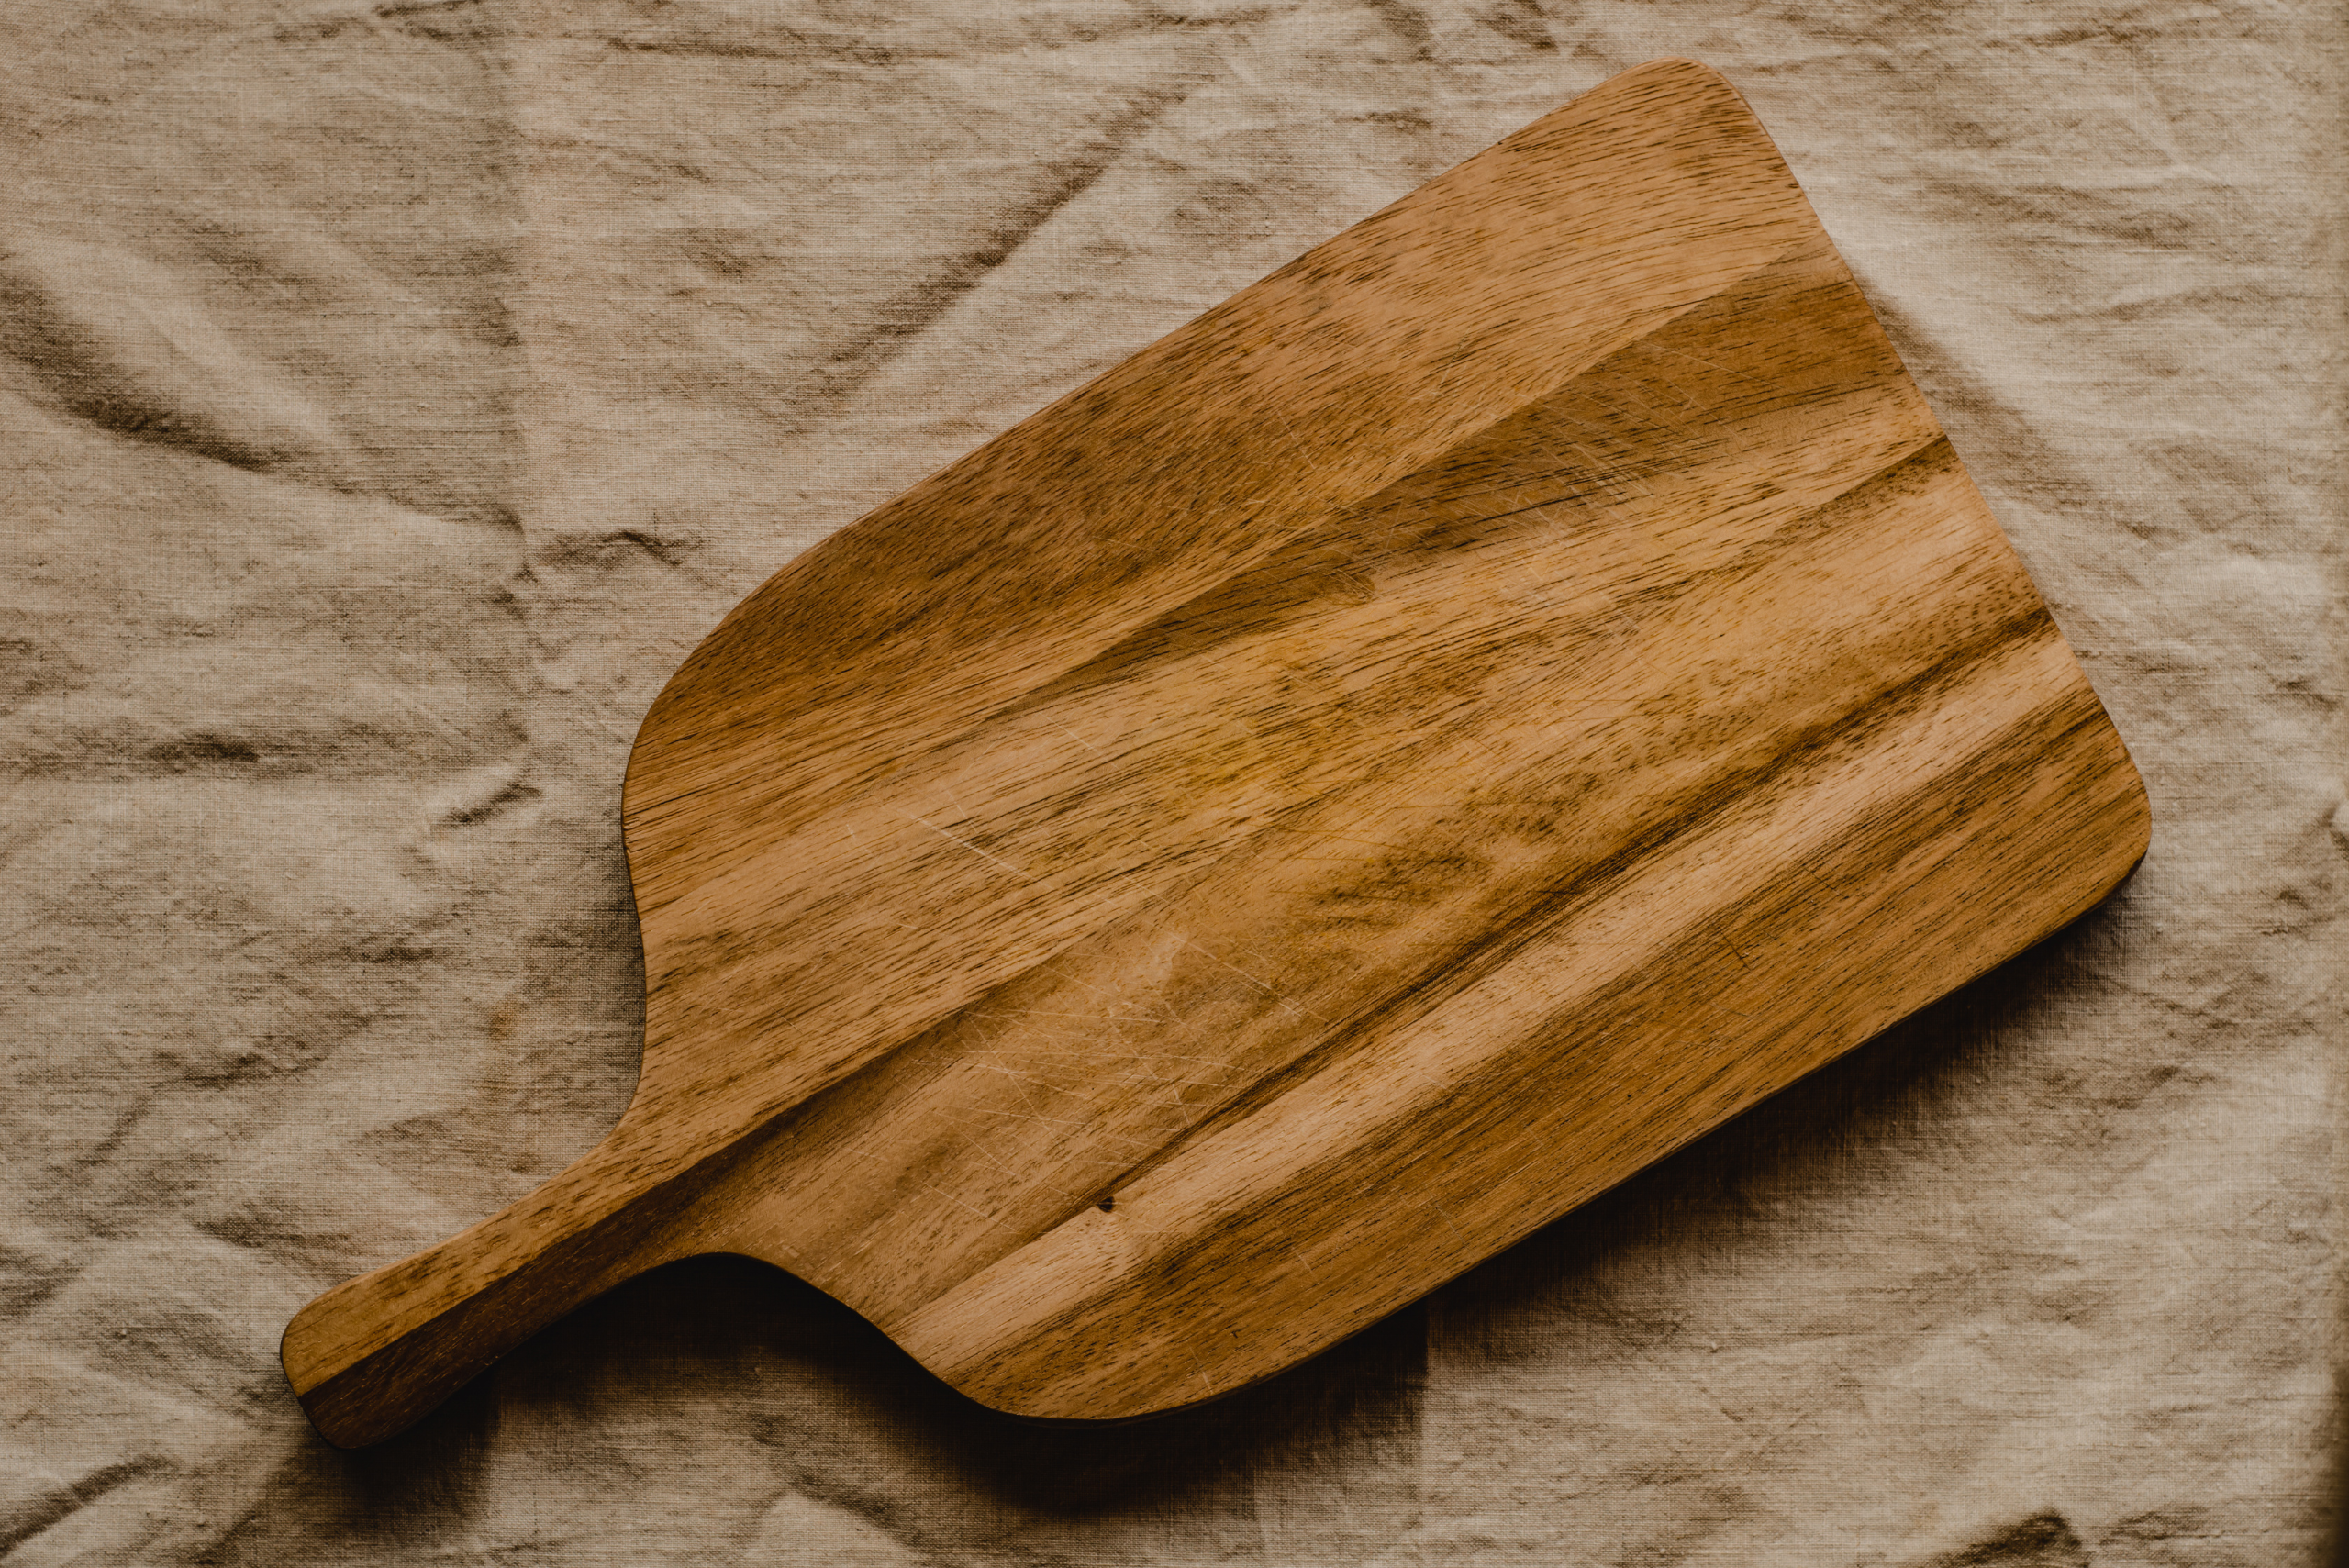 A wooden cutting board on a fabric sheet.